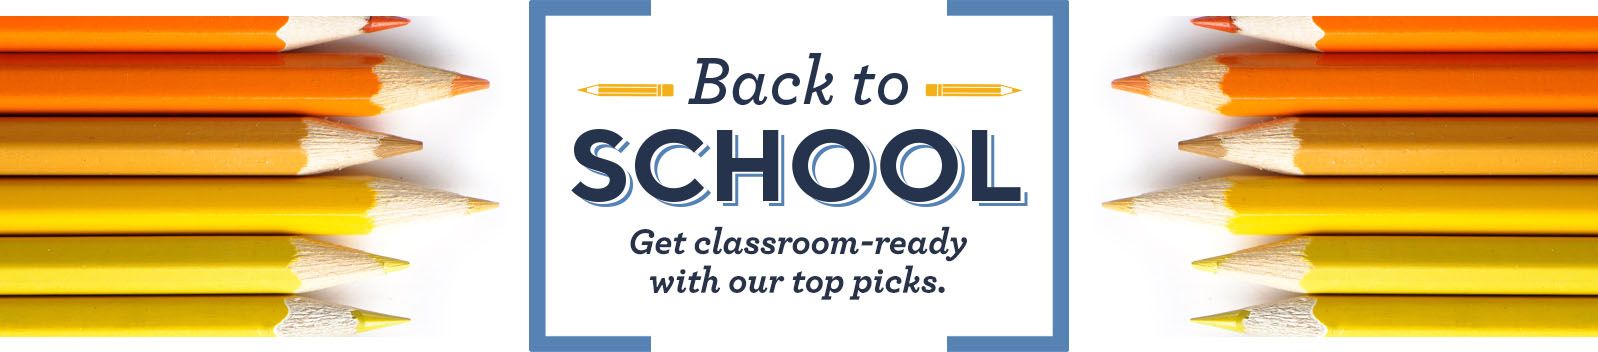 Back to School  Get classroom-ready with our top picks.